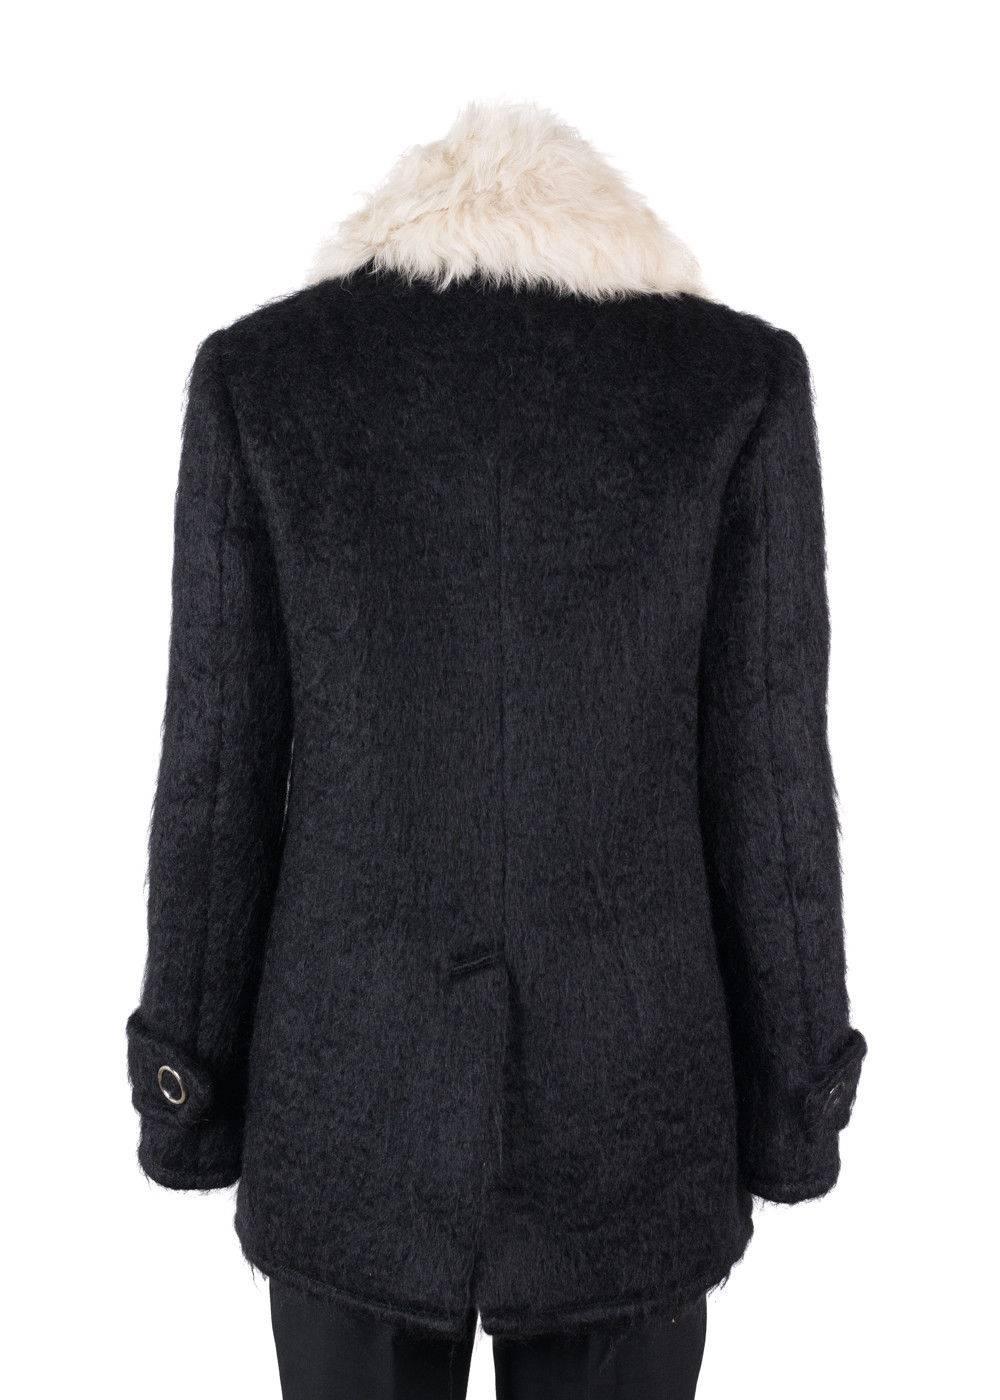 Brand Alexander Wang Shearling Coat
Original Tag
Retails in Stores & Online for $2500
Women's Size US 0 Fits True to Size

Your Alexander Wang Coat will never disapoint during the winter season. This coat was constructed using 100% pure lamb and